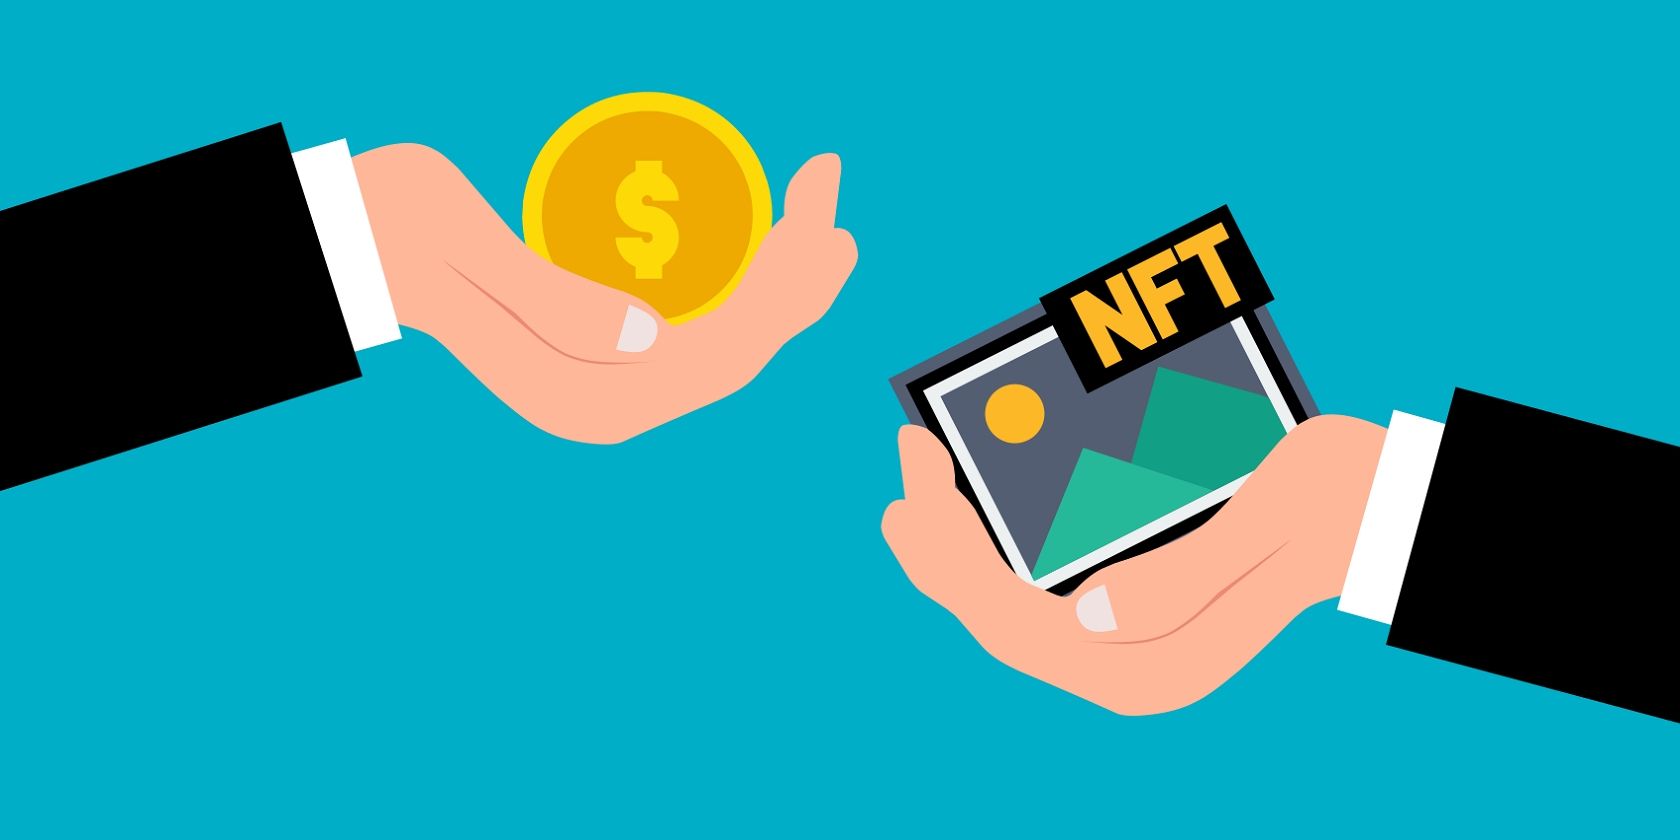 two hands exchanging dollar (coin) and NFT 